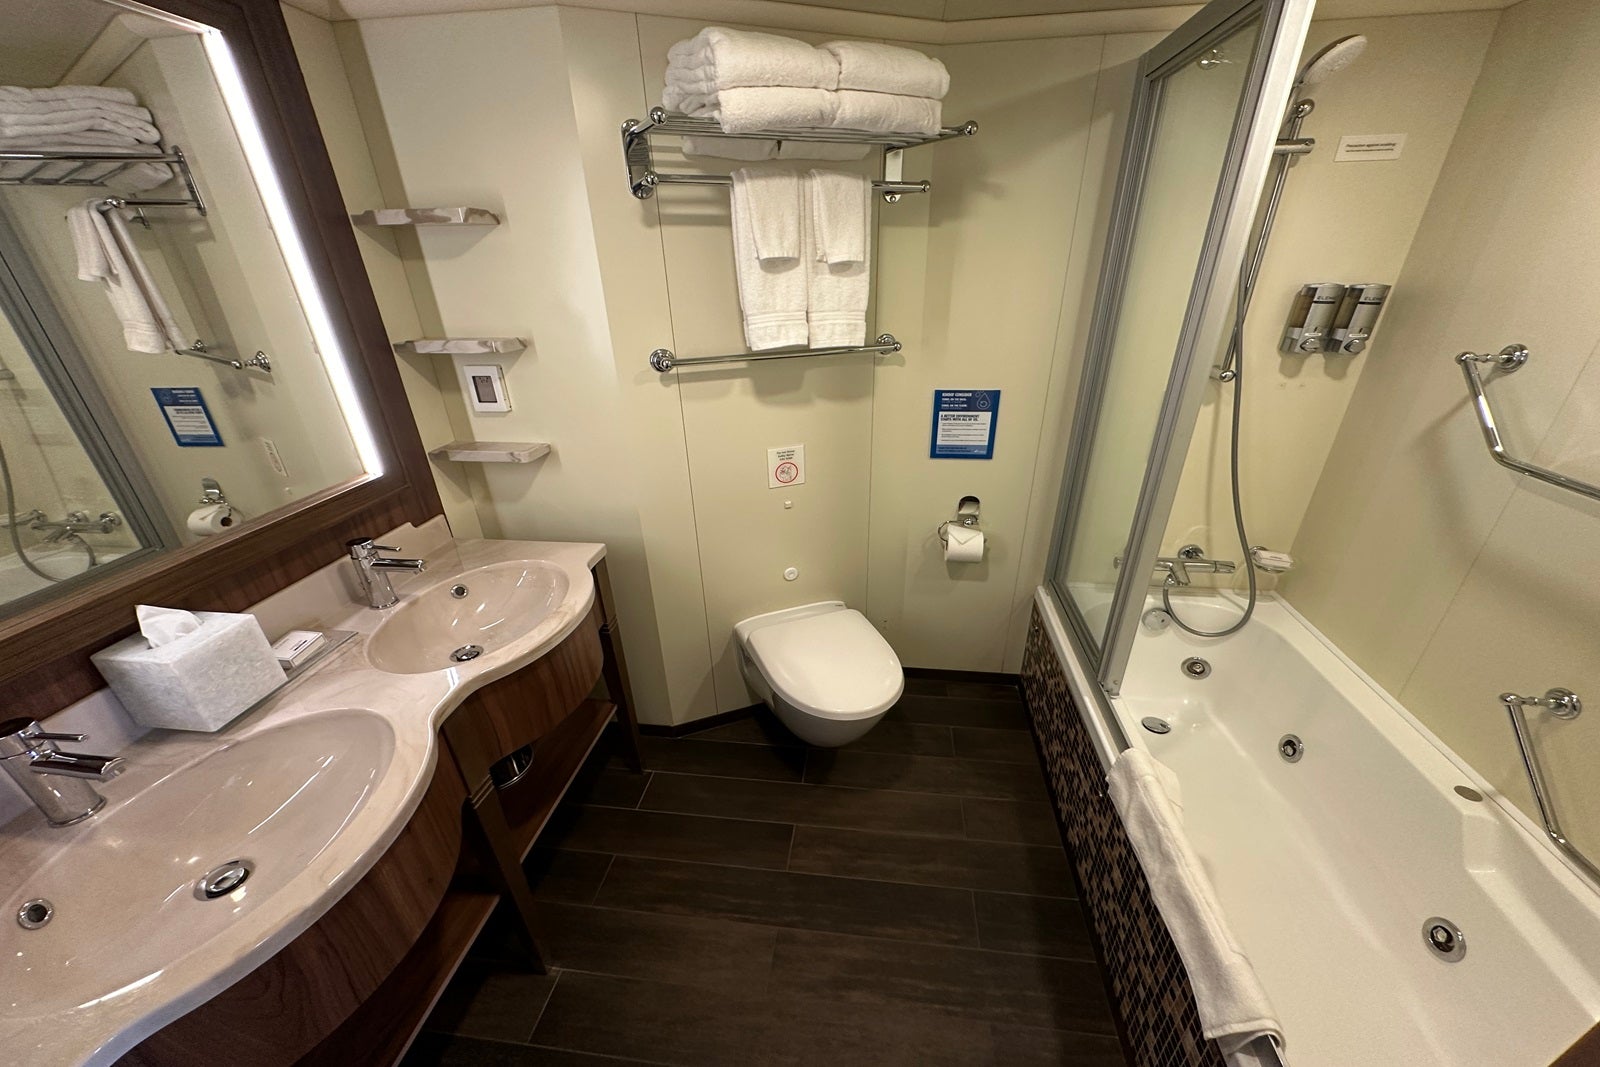 carnival cruise ship review